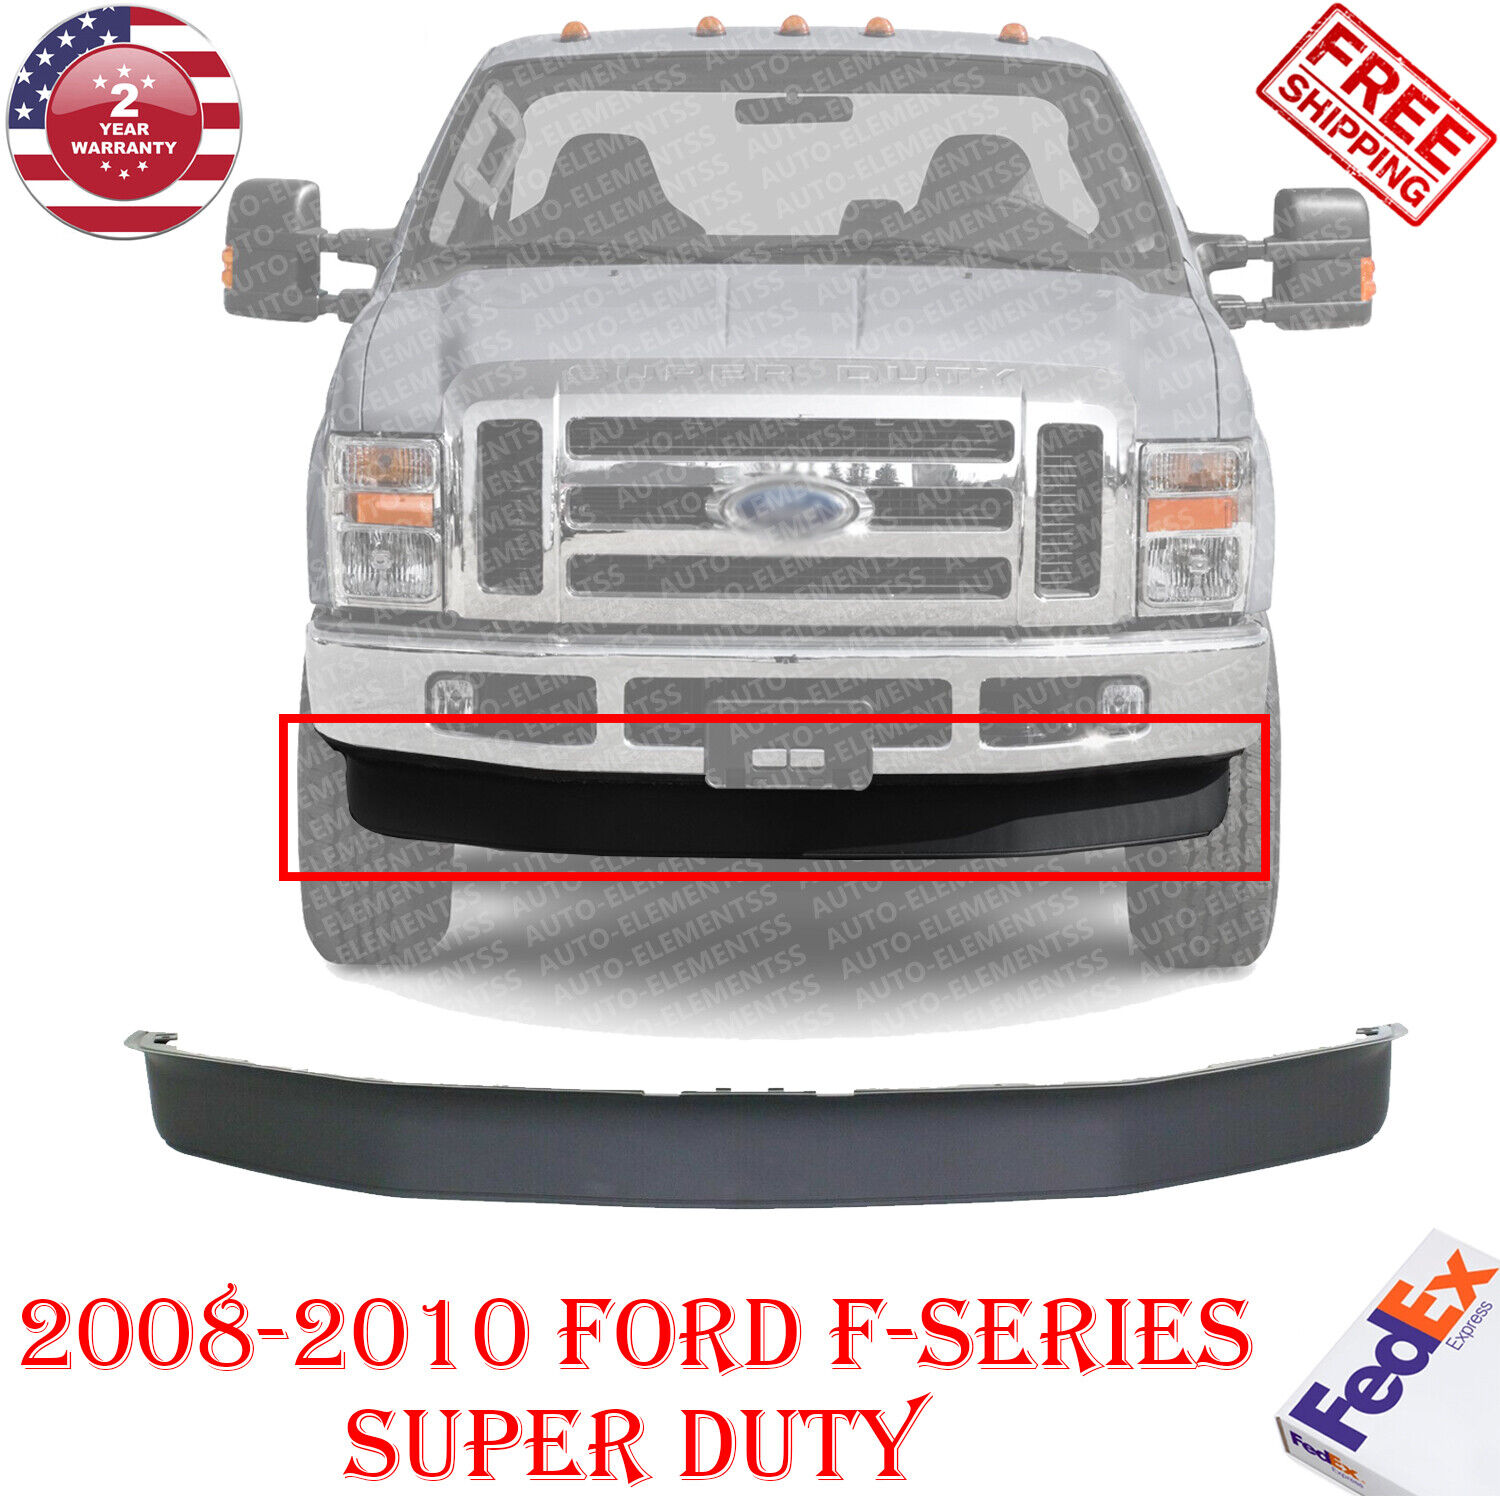 Lower Valance Spoiler Textured For 2008-2010 Ford F-250 F-350 Super Duty 4WD